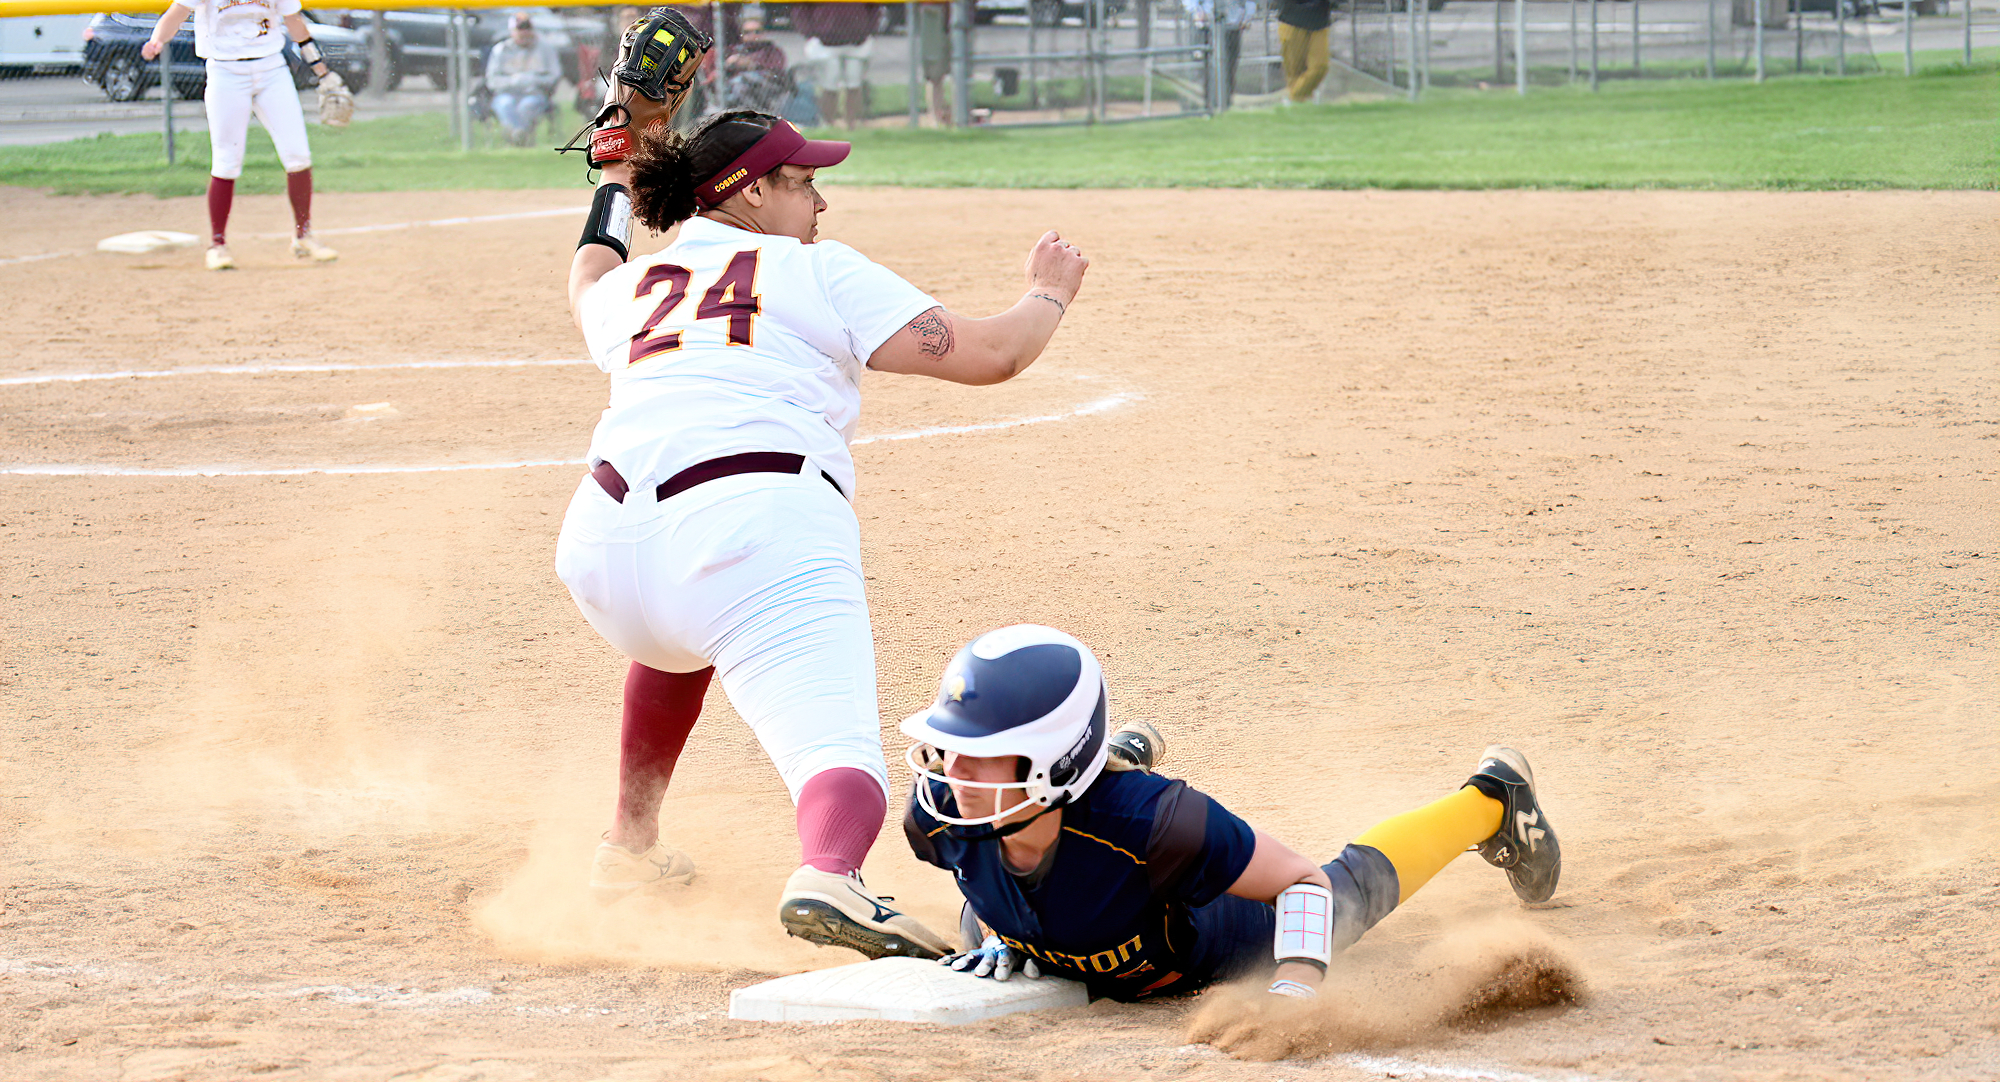 Gabby Brown stretches to catch the ball at first base on an attempted double play in the second game of the Cobbers' doubleheader with Carleton.